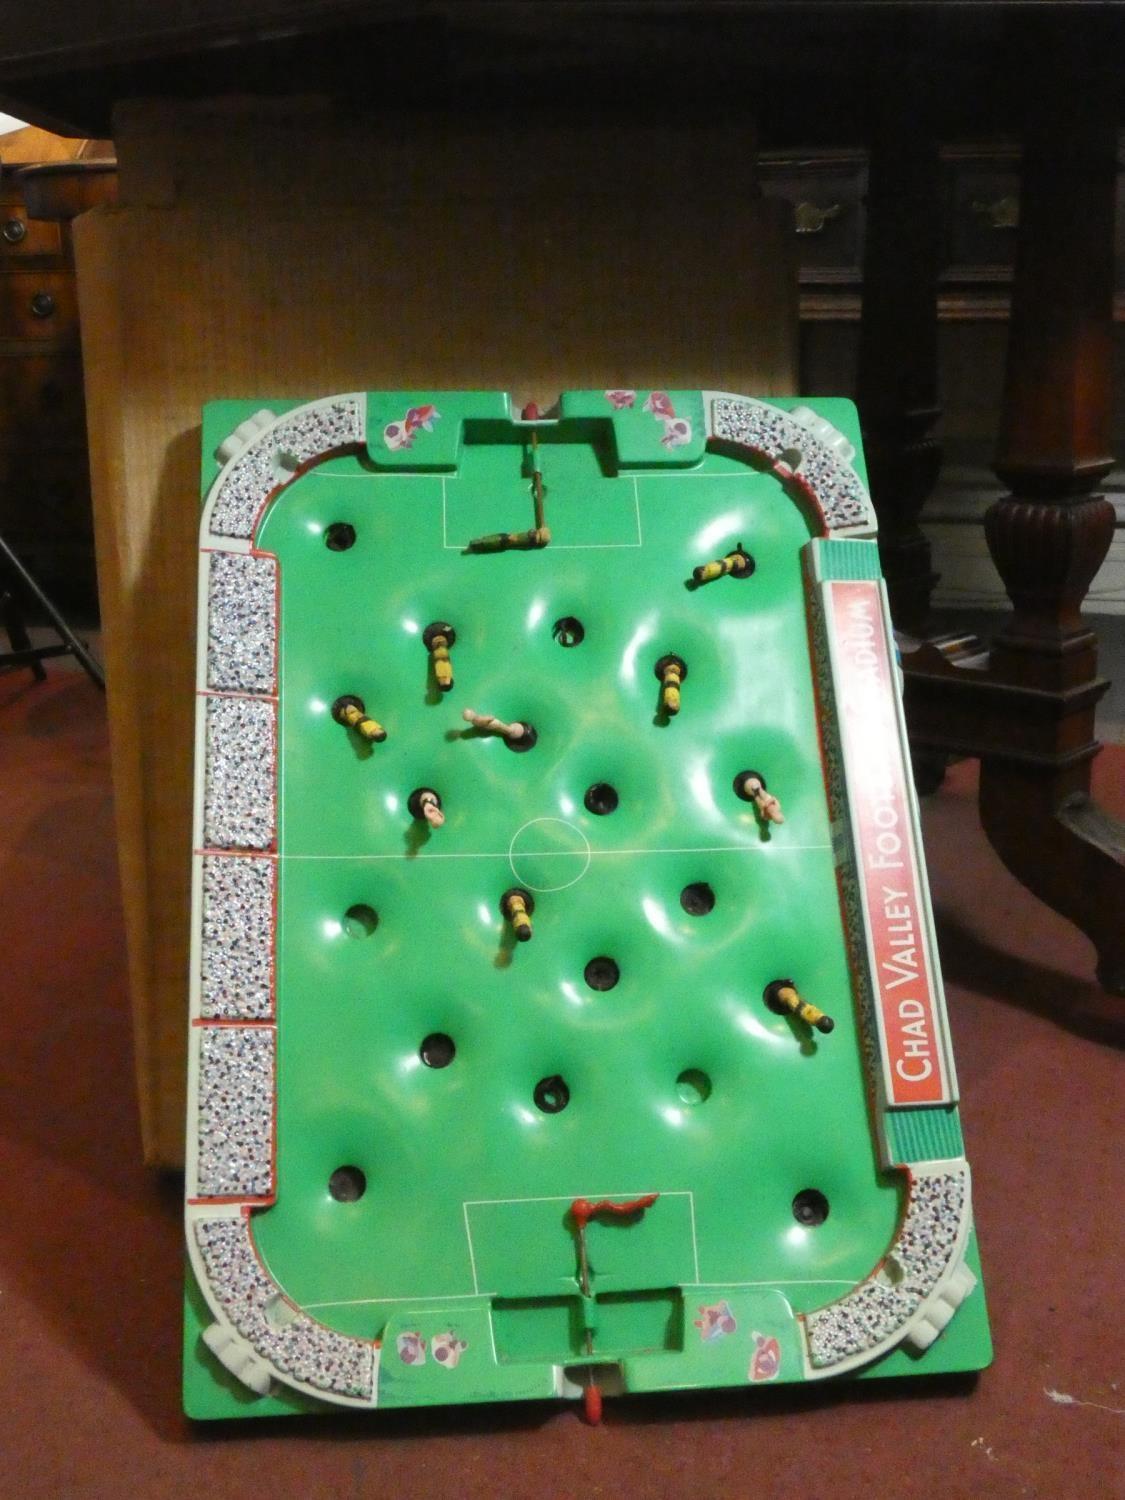 A ChadValley bagatelle game together with super soccer game, ChadValley test cricket game, play worn - Image 4 of 5